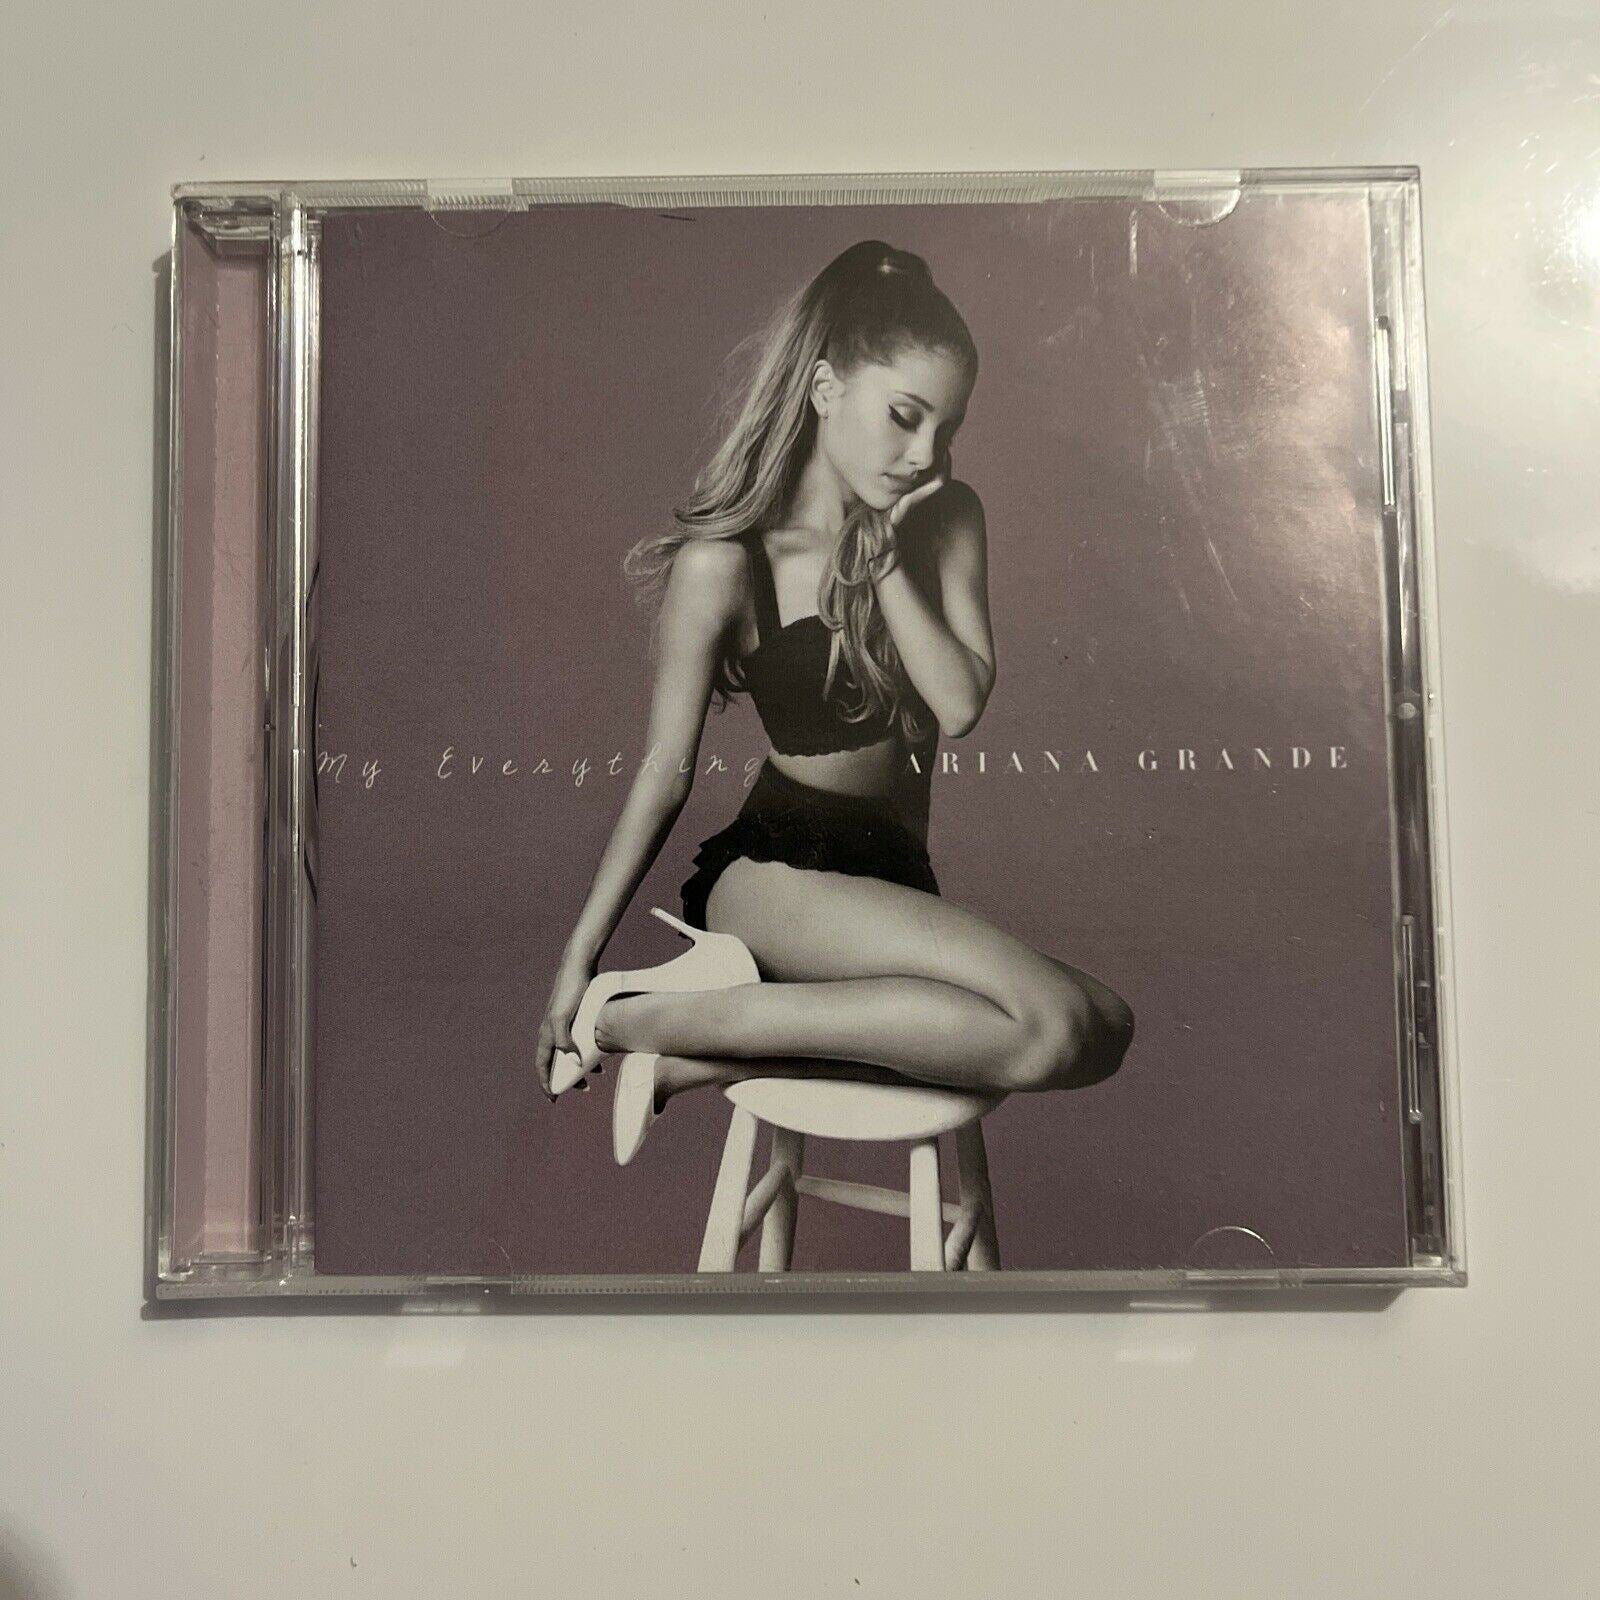 My Everything Deluxe CD Ariana Grande – Presume Music Shop